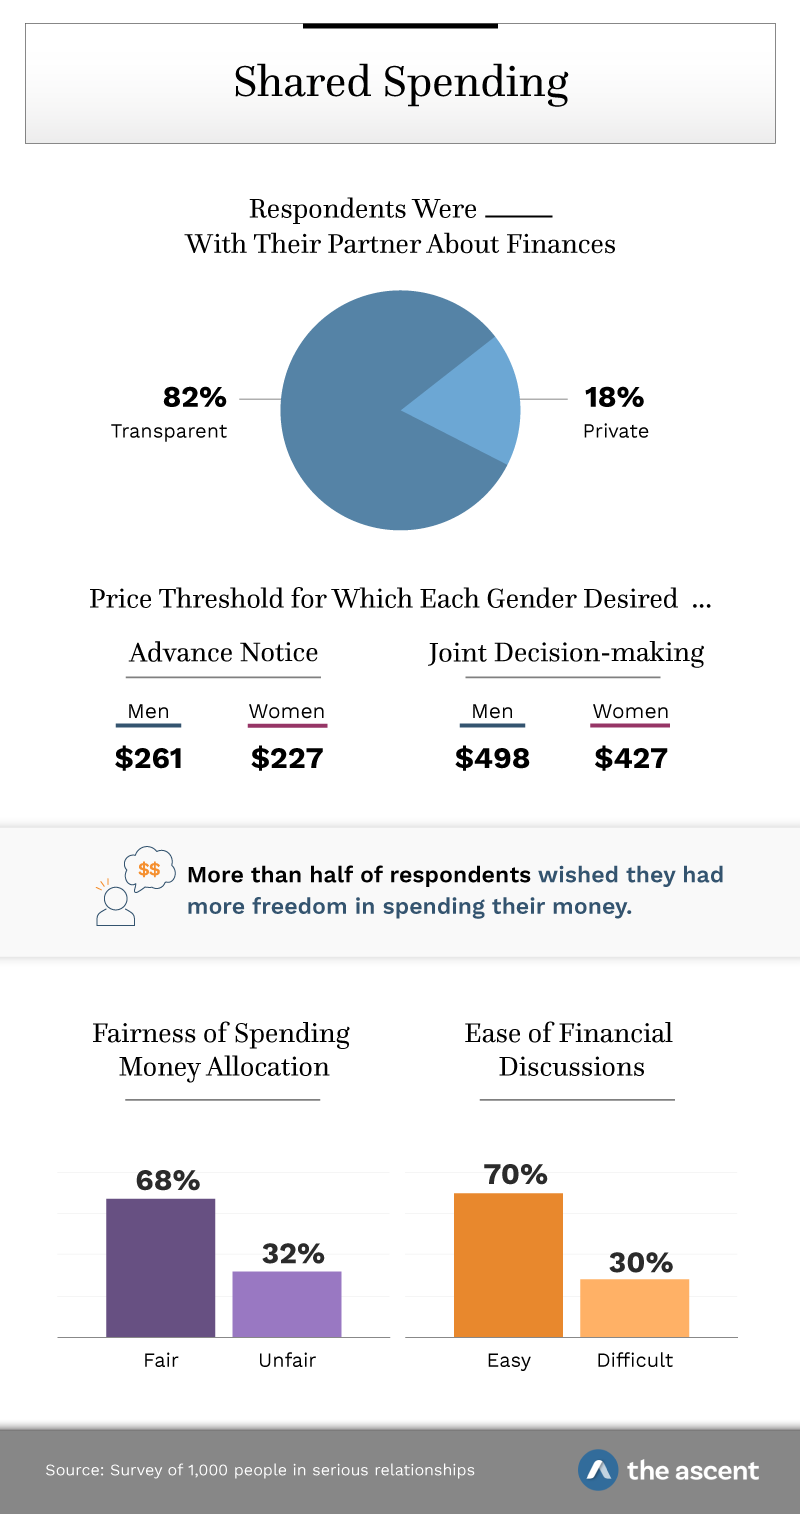 Sharing Spending: 82% of respondents were transparent with their partner about finances. Price threshold for which each gender desired.. Advanced Notice: Men $261, Women $227, and Joint Decision-making: Men $498, Women $427. More than half of respondents wished they had more freedom in spending their money. Fairness of spending allocation: Fair 68%, Unfair 32%. Ease of financial discussions: Easy 70%, Difficult 30%. Source: Survey of 1,000 people in serious relationships by The Ascent.